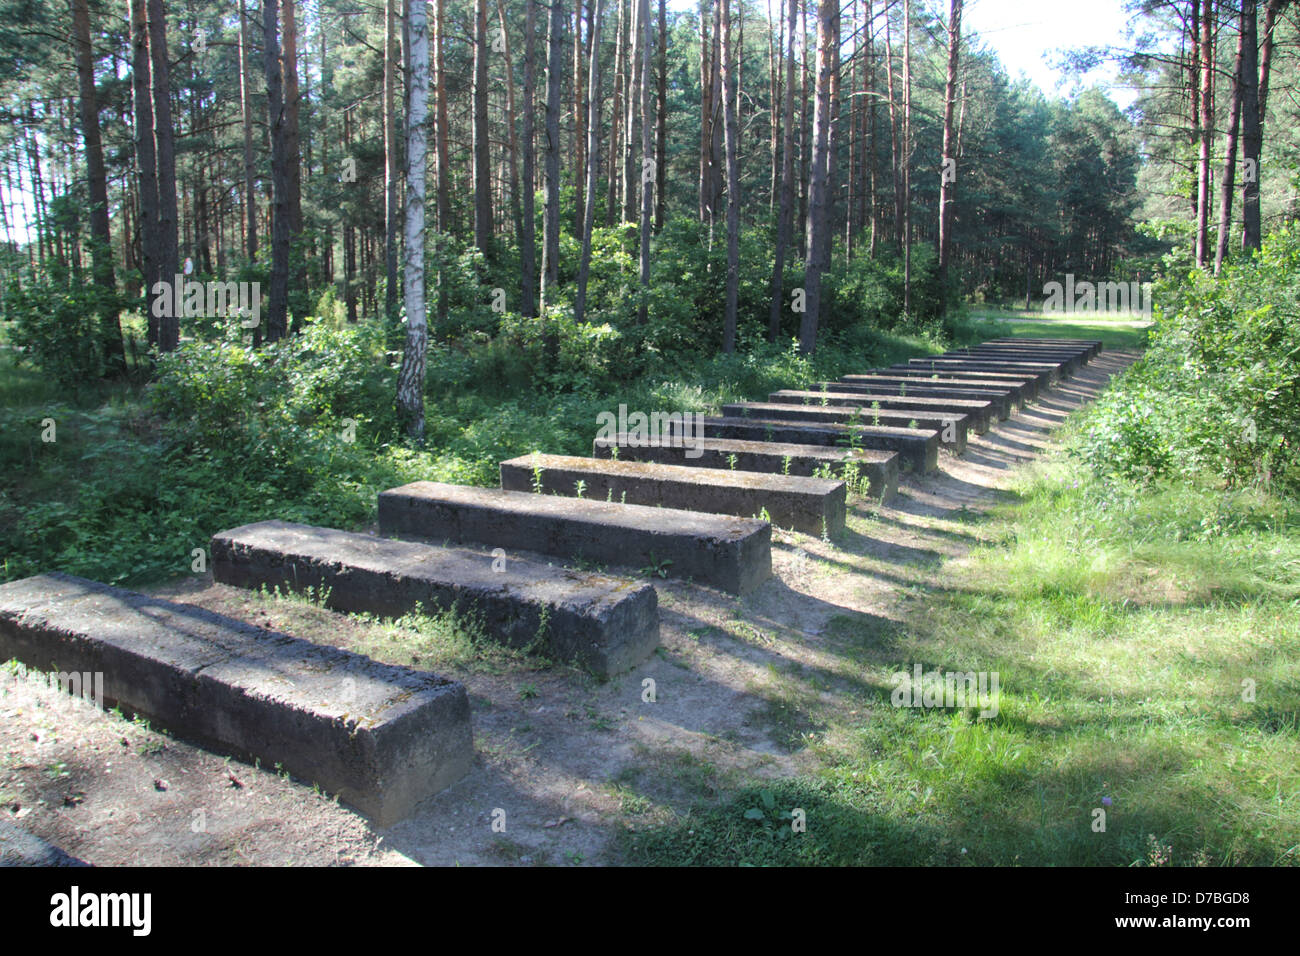 Monument of the railroad tracks that led the holocaust victims into Treblinka extermination camp in Poland Stock Photo